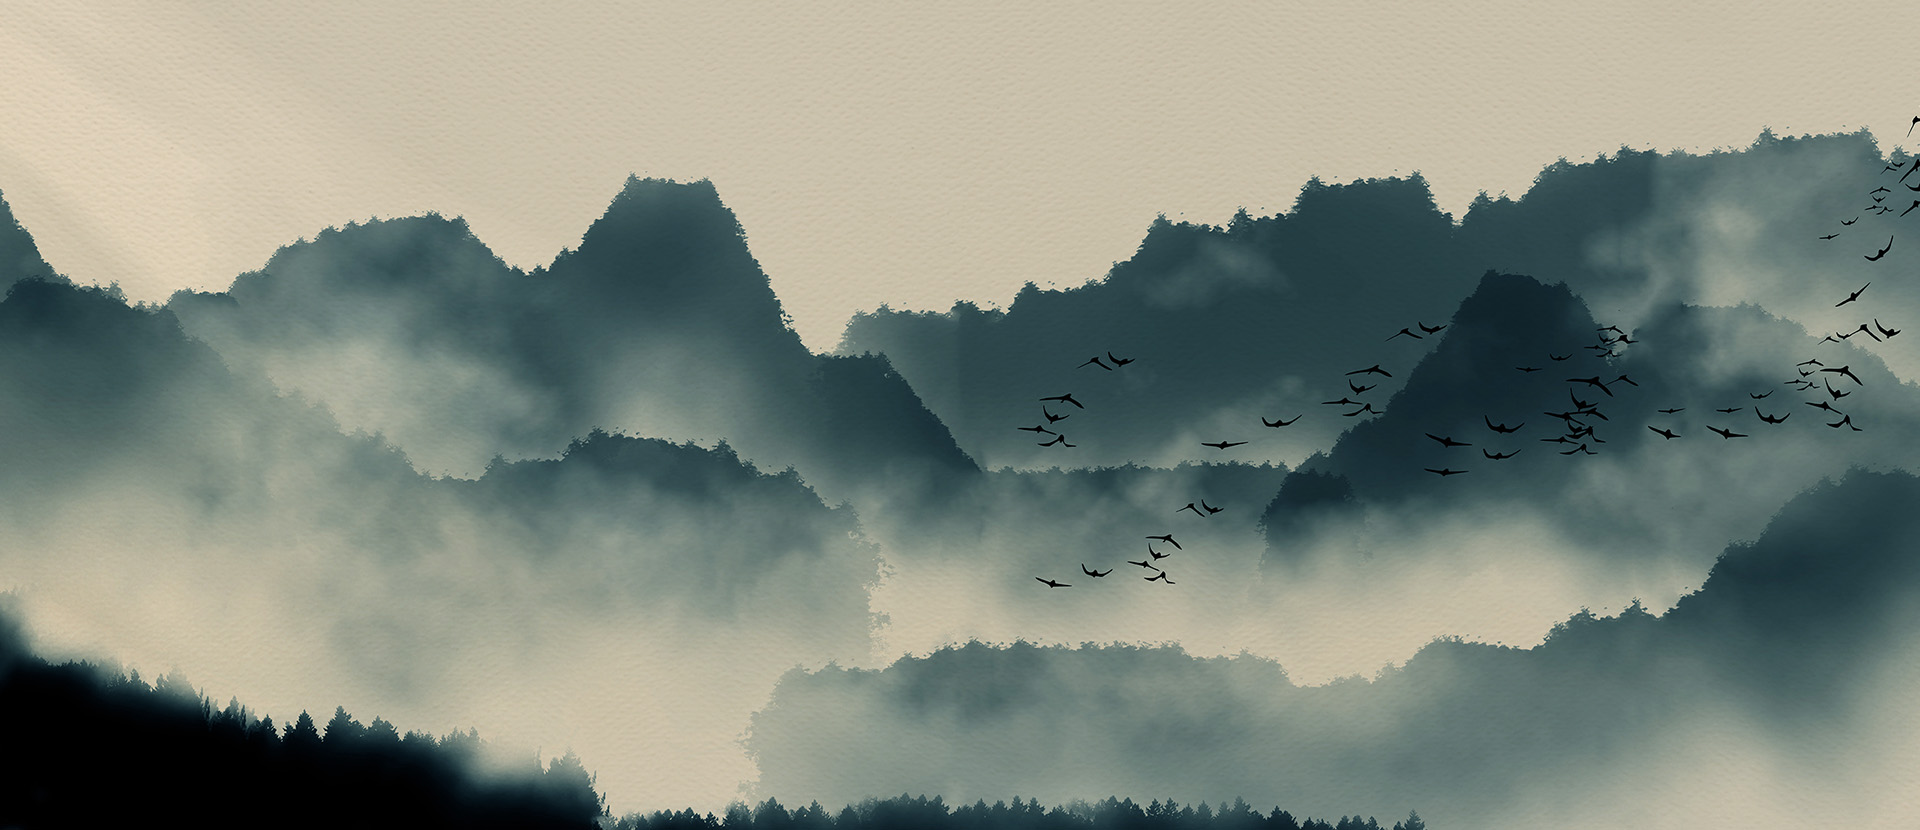 watercolor image of mountains with birds flying